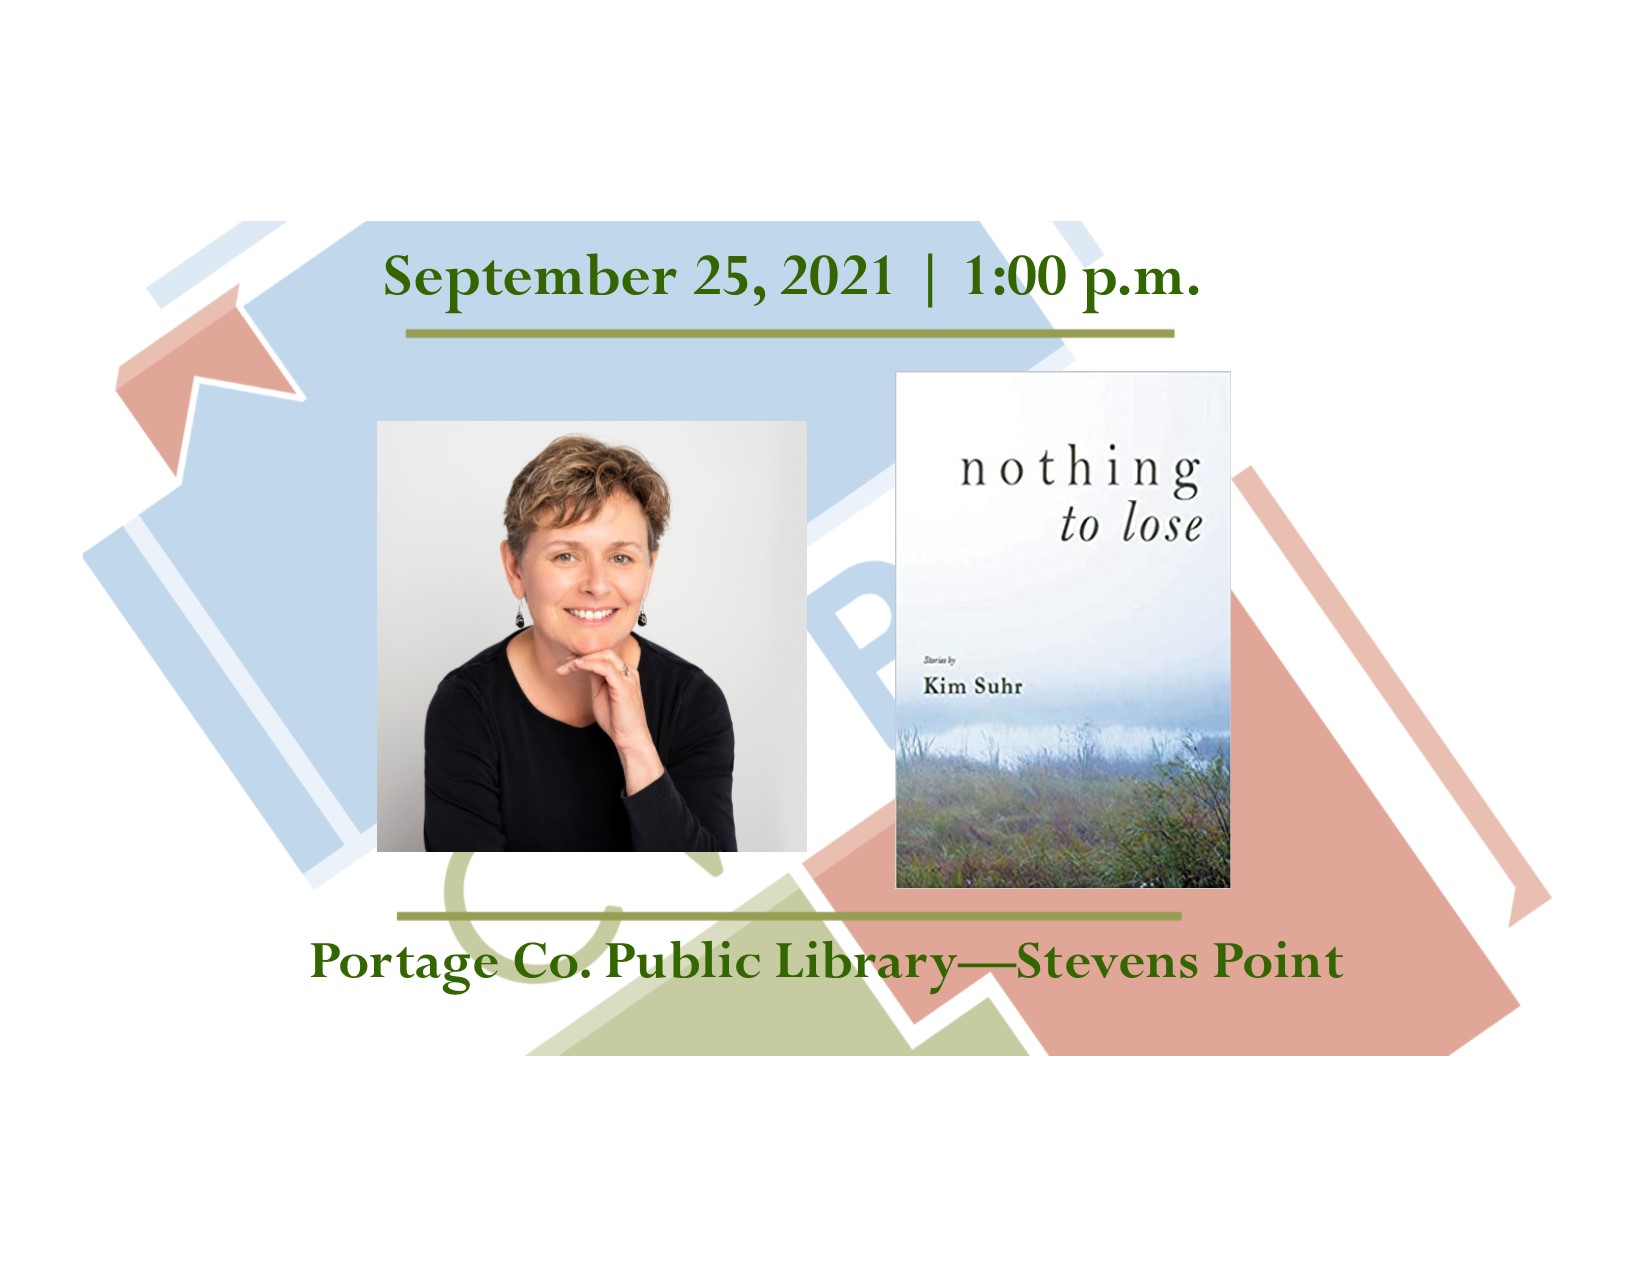 Author Kim Suhr and her short story collection, Nothing to Lose